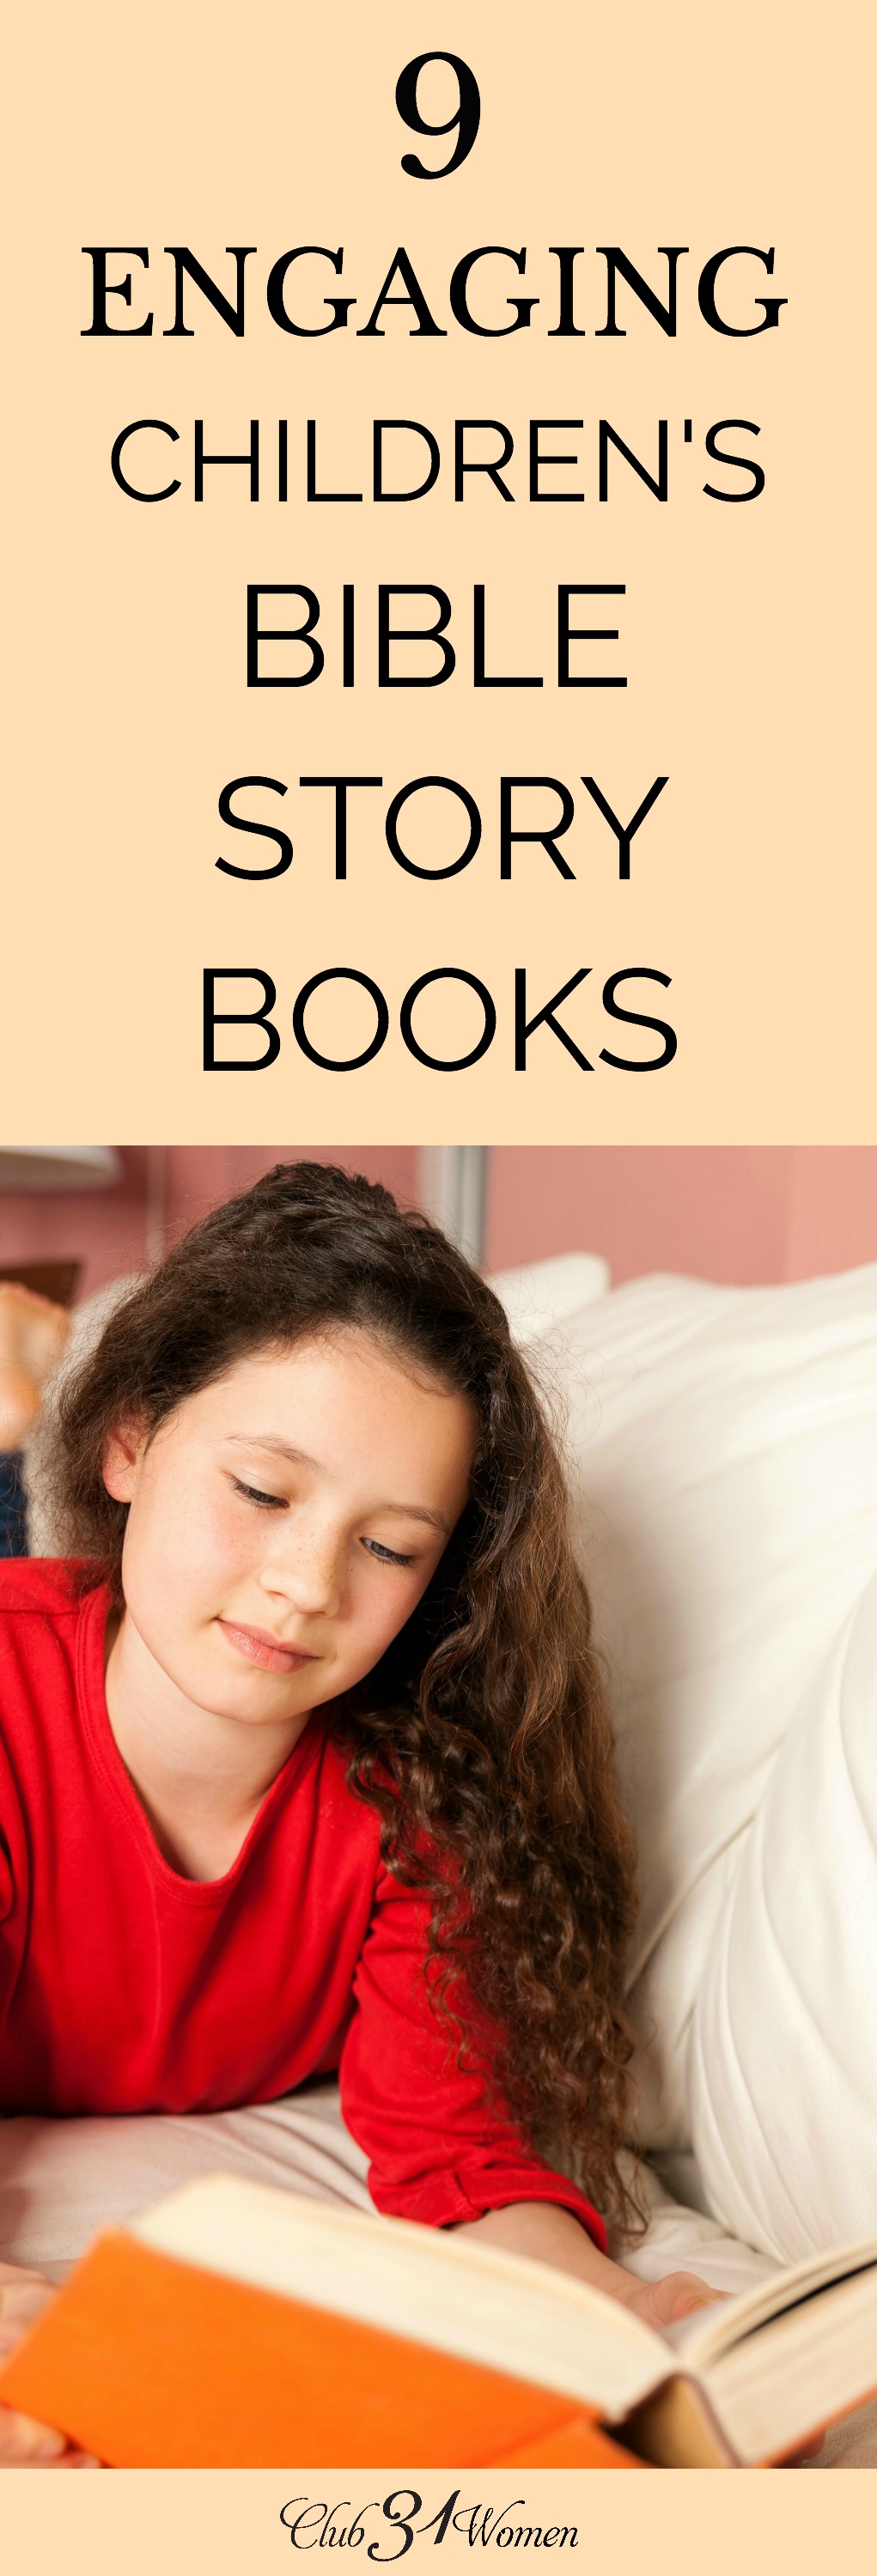 Teaching our children not just the big truths of the Bible but also telling them the beloved stories through bible story books helps them engage with Him! via @Club31Women